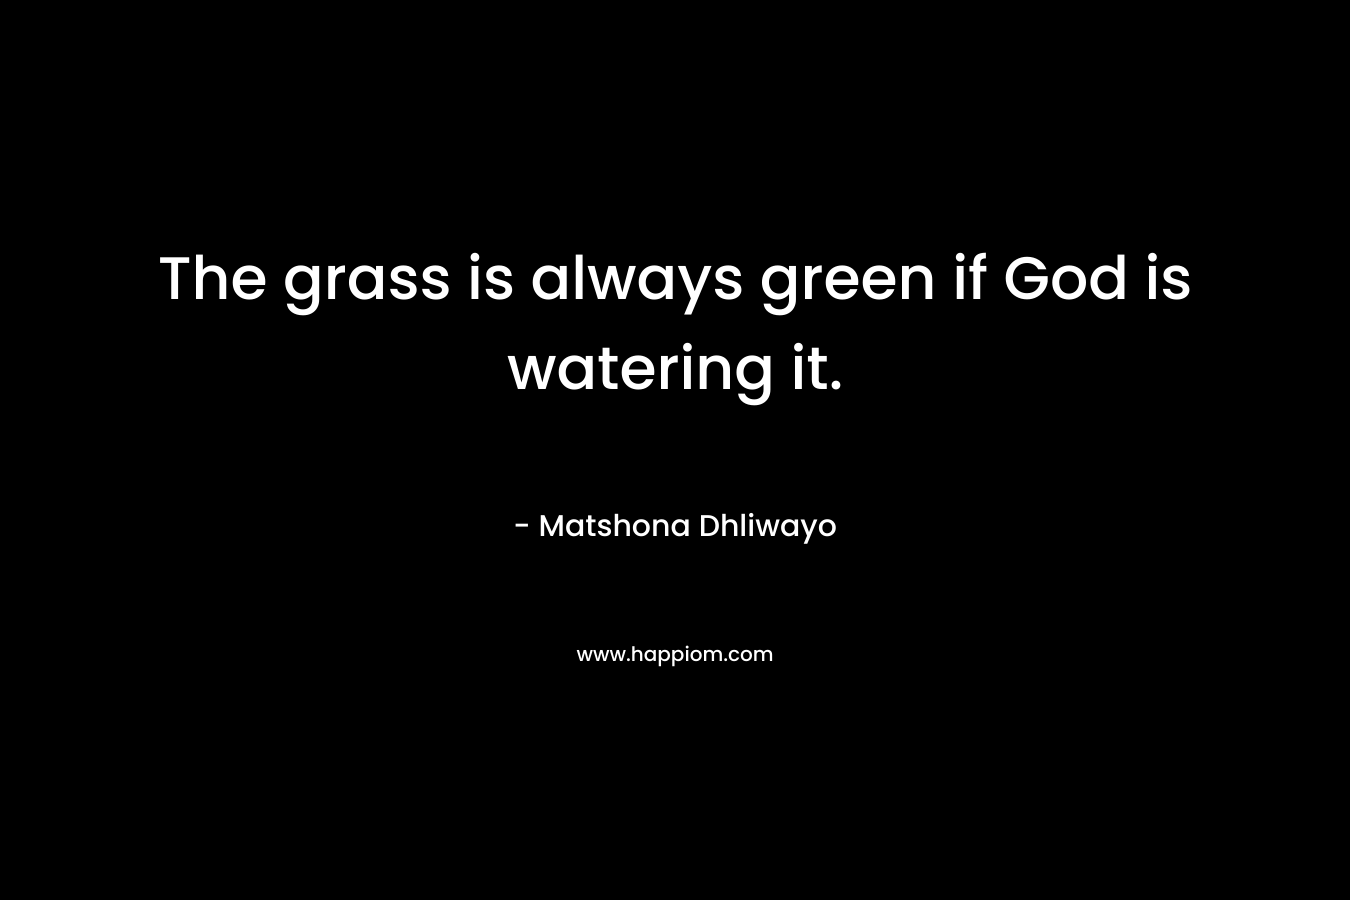 The grass is always green if God is watering it.